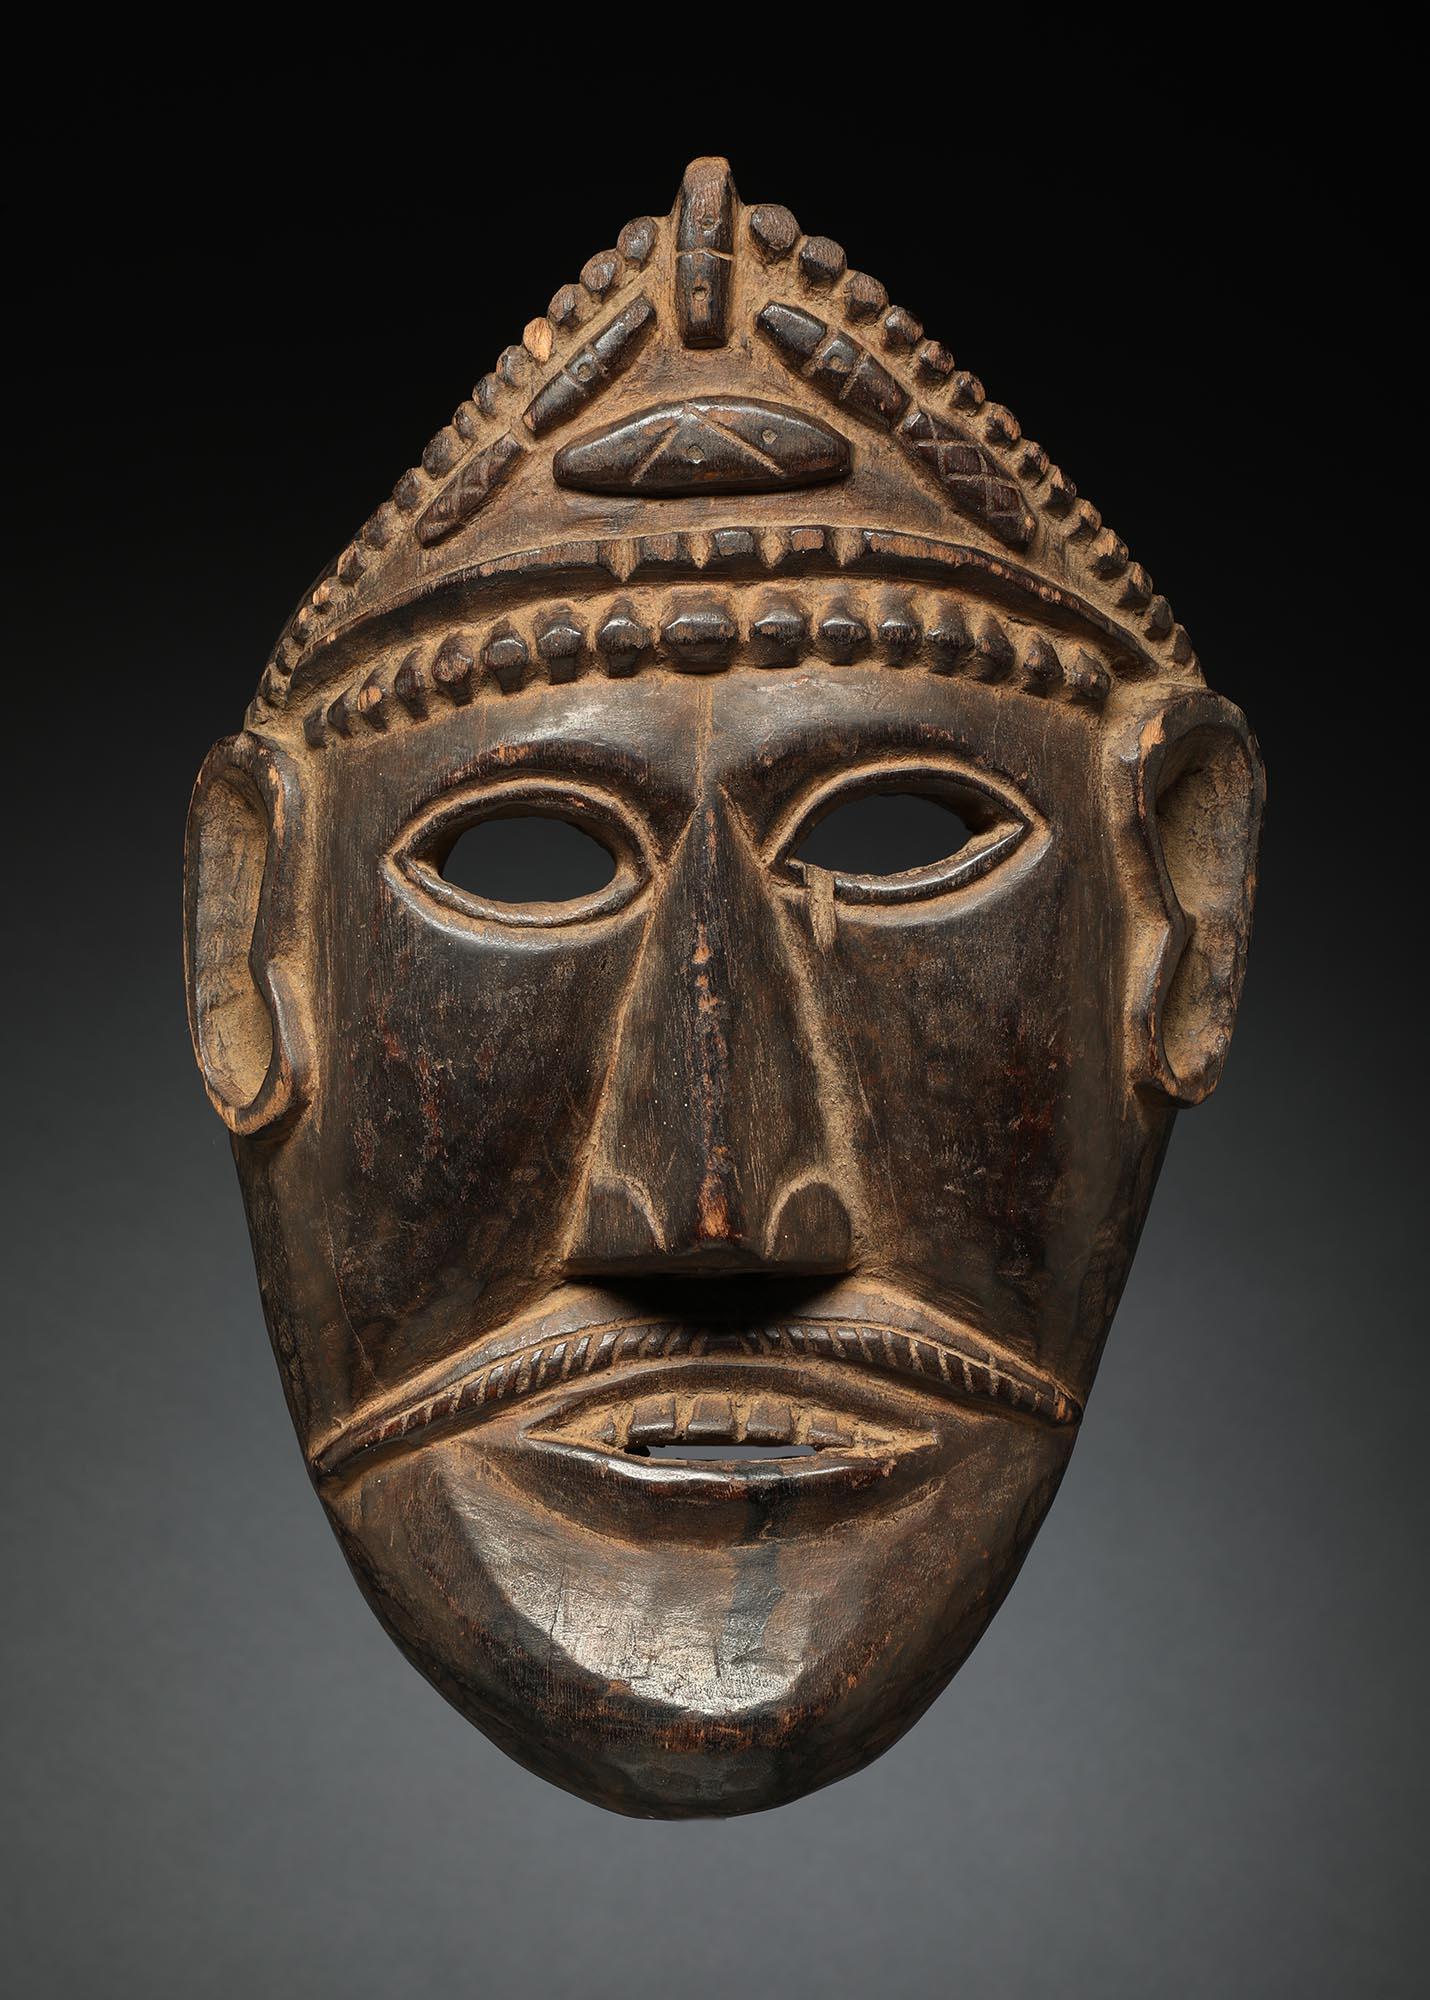 Flat dance mask from Nepal with flat face with strong chin, open eyes and carved headdress with Tzi magical beads. Ex- private collection in Midwest, ex private collection, acquired in Nepal in 1970's-1980's. Mask 12